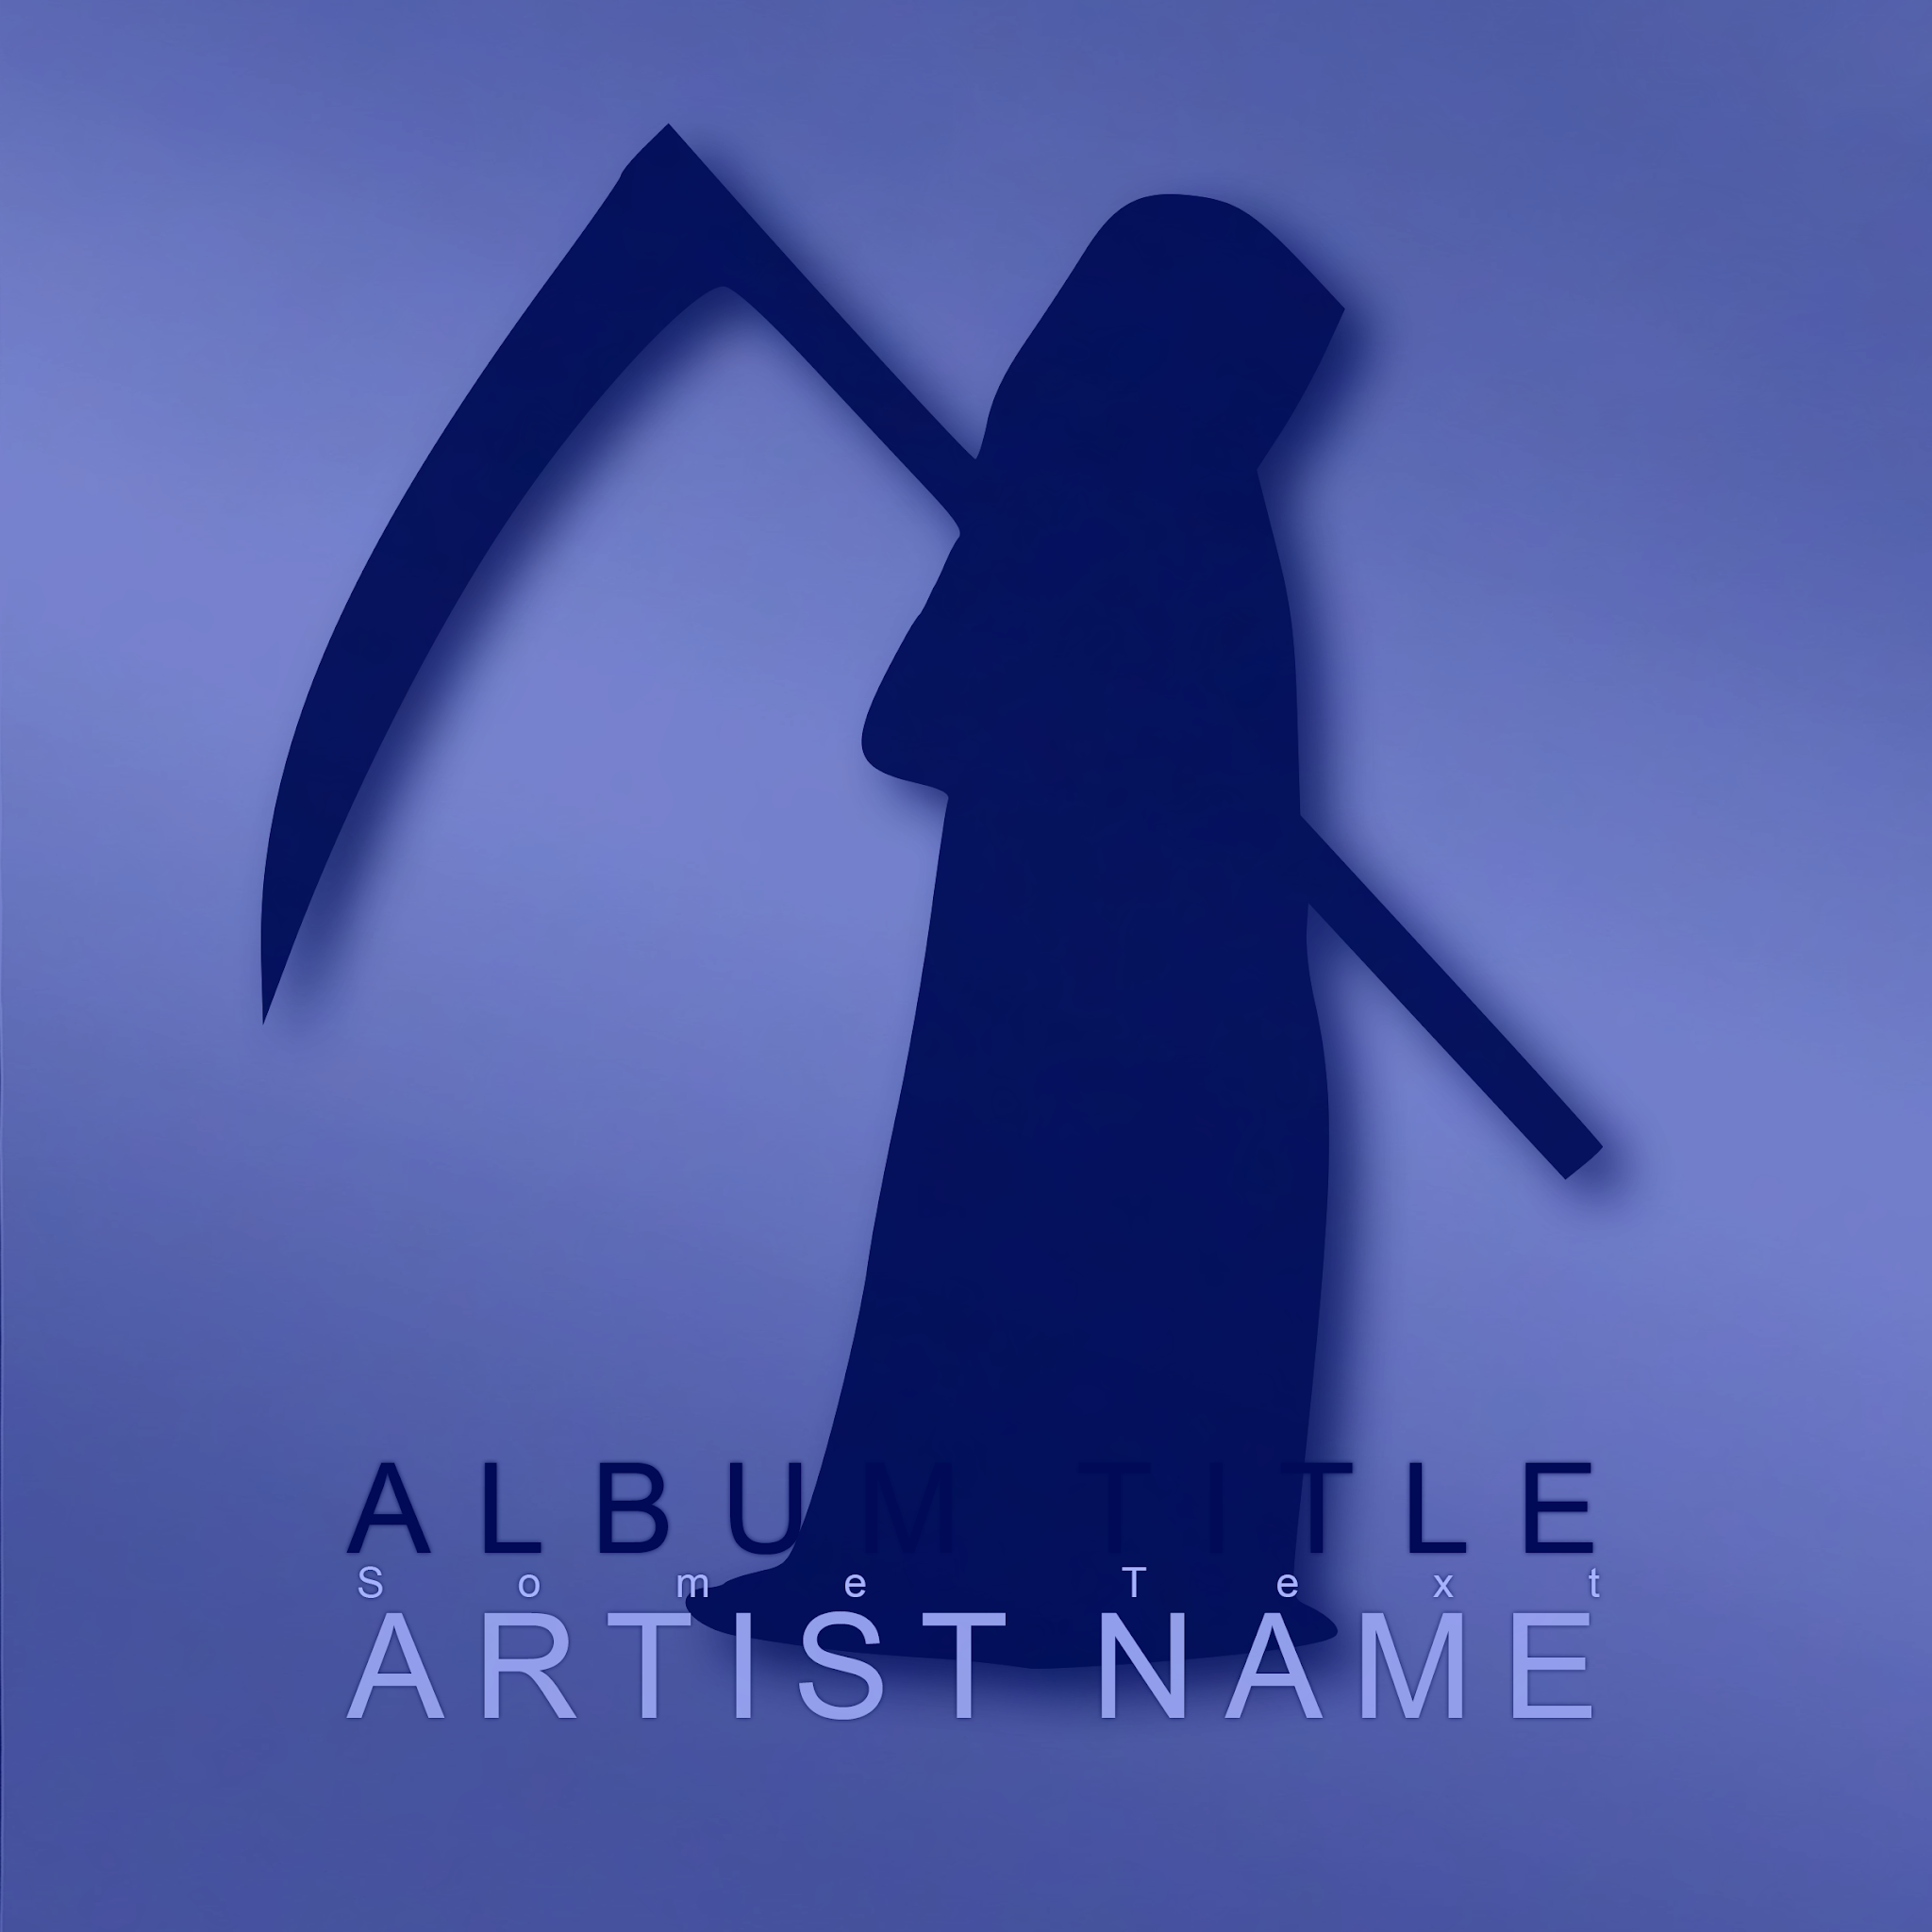 Music cover artwork design showing spooky angel of death silhouette with 3D graphic effects. Suitable for use in CD case/booklet, vinyl, mp3 downloads, Spotify, iTunes/Apple Music, CD Baby and all digital music services